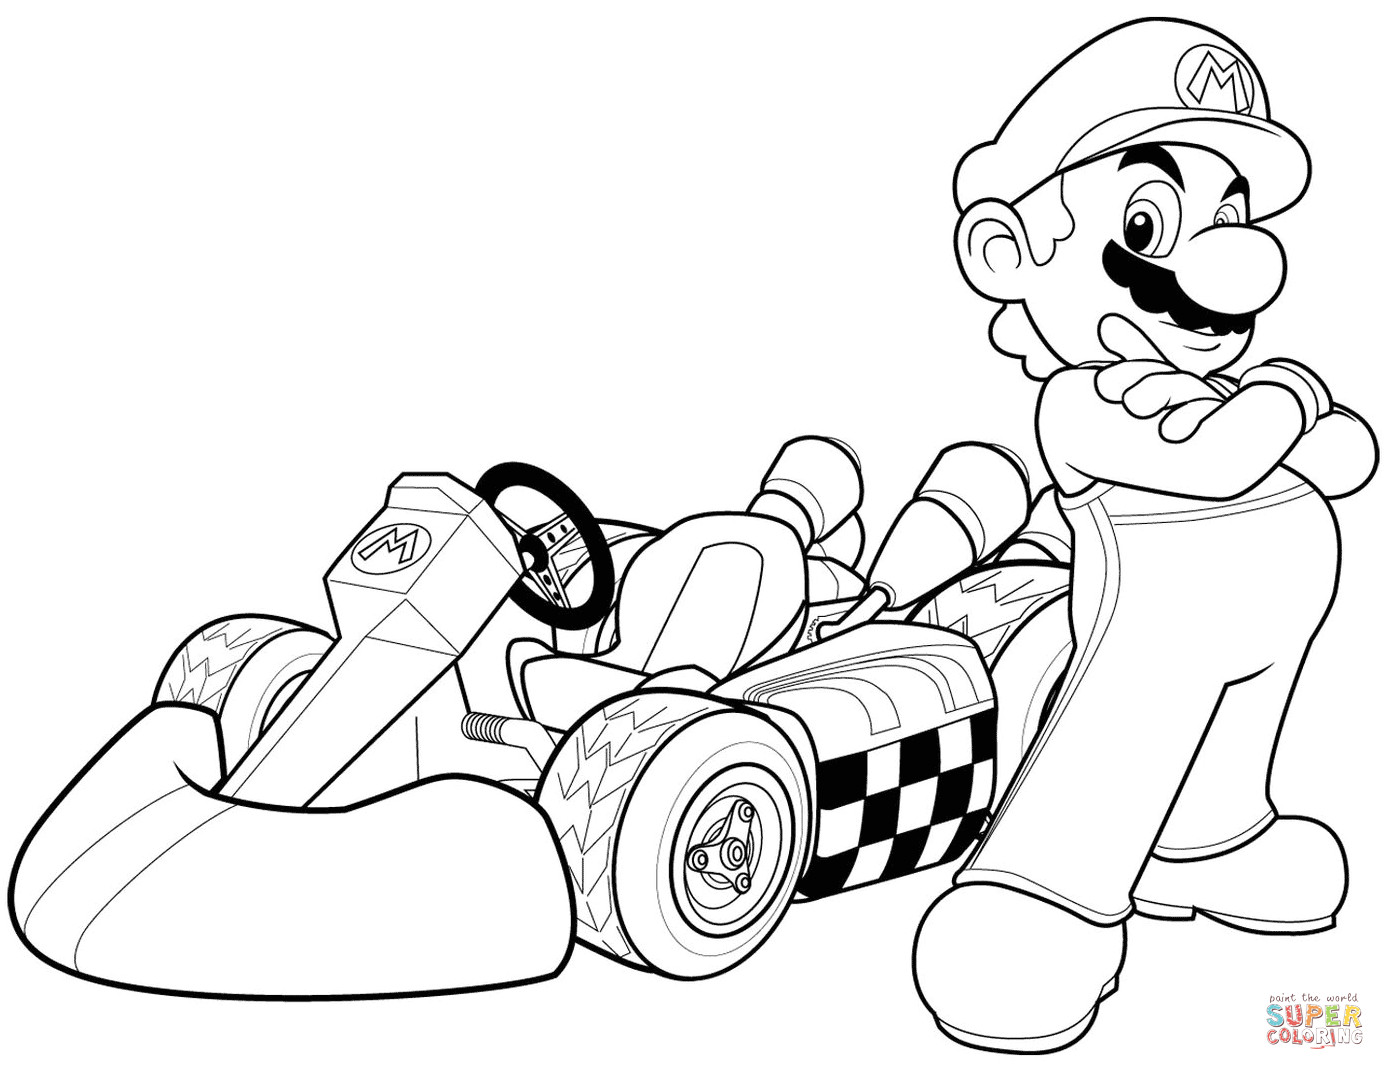 5088bf29ded6be78c91f e75e03 luigi in mario kart wii coloring page free printable coloring pages 1385 1070